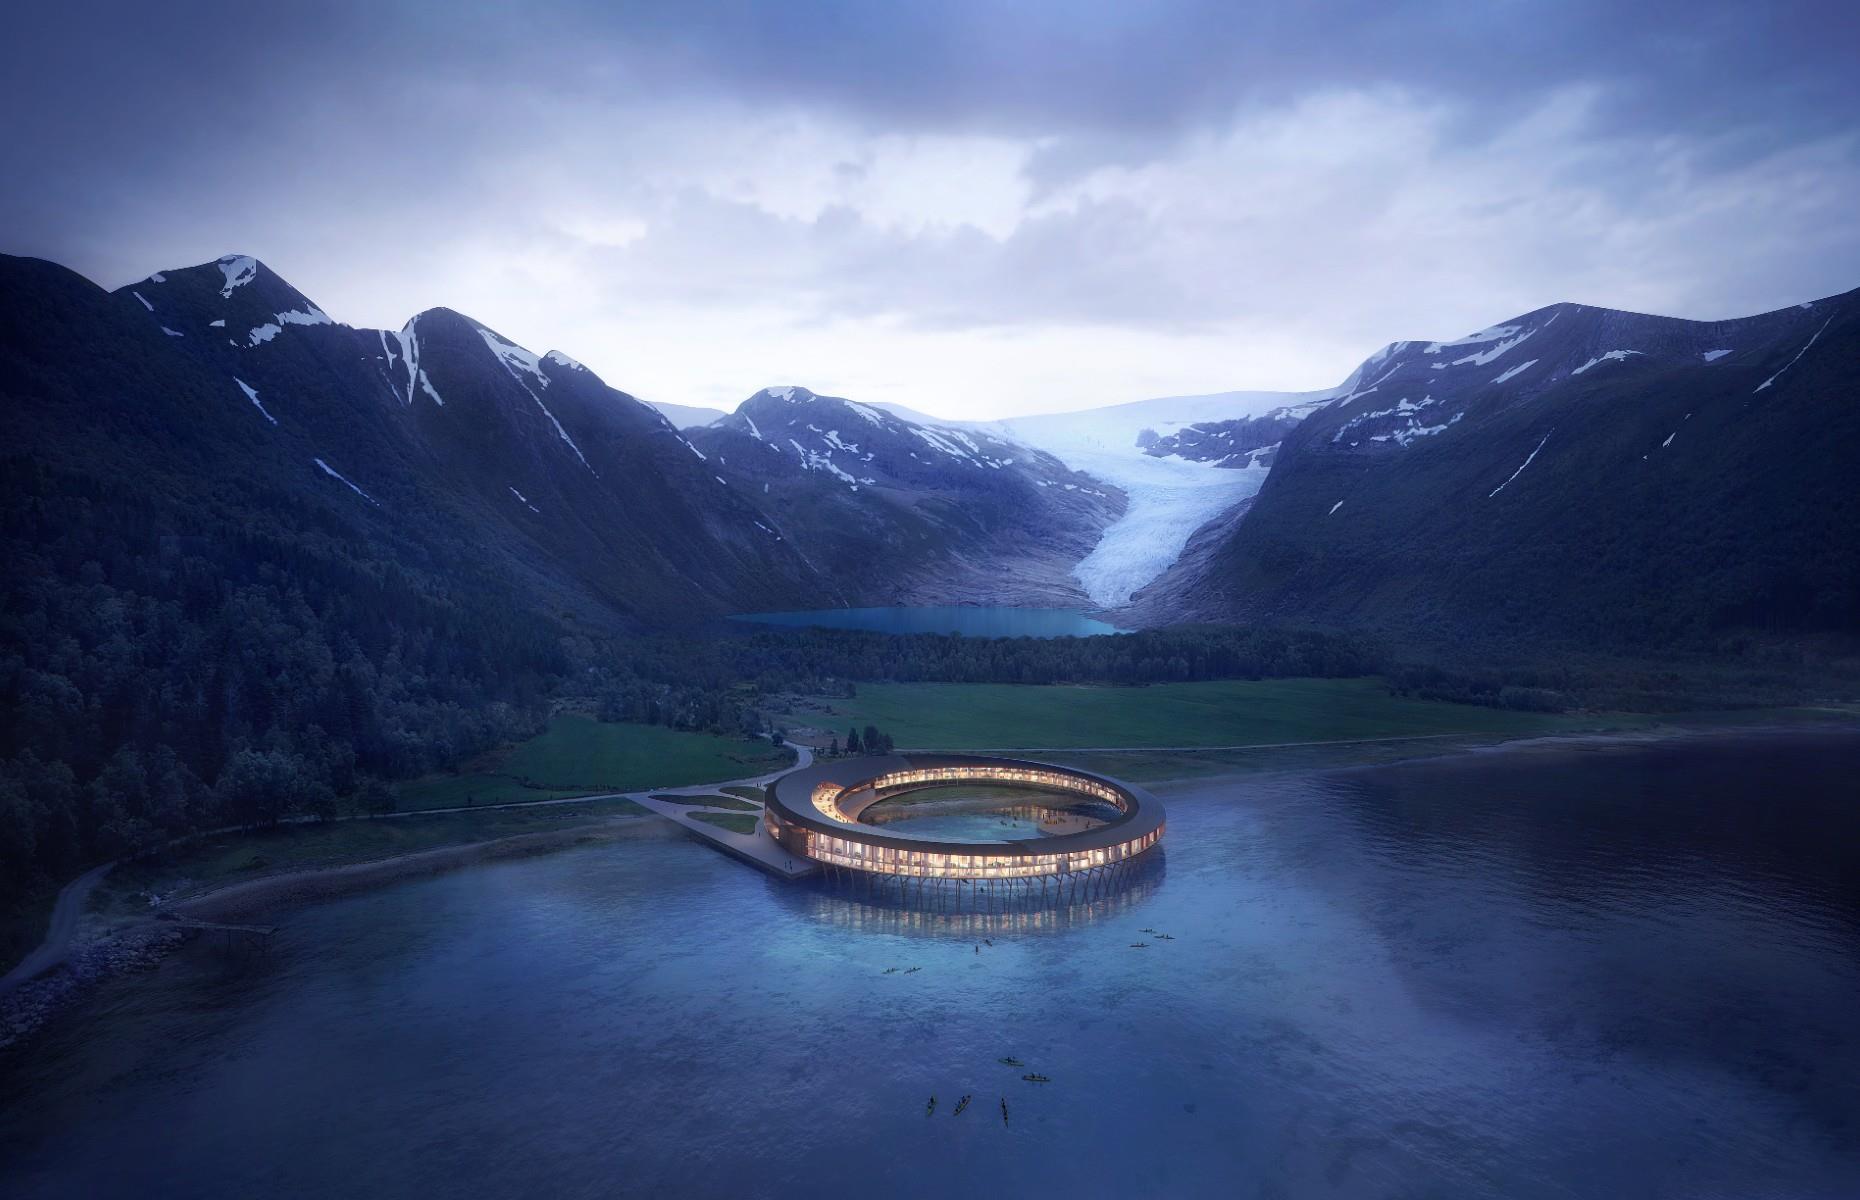 The hotel's design is inspired by a “fiskehjell”, a wooden structure used to dry out fish, as well as traditional fishermen's homes. And it looks especially striking against its mountain backdrop. Beyond ogling the hotel and surrounding landscapes, guests can relax at the two-story spa or get involved with activities, from sailing on the fjords in summer to cross-country skiing in winter.